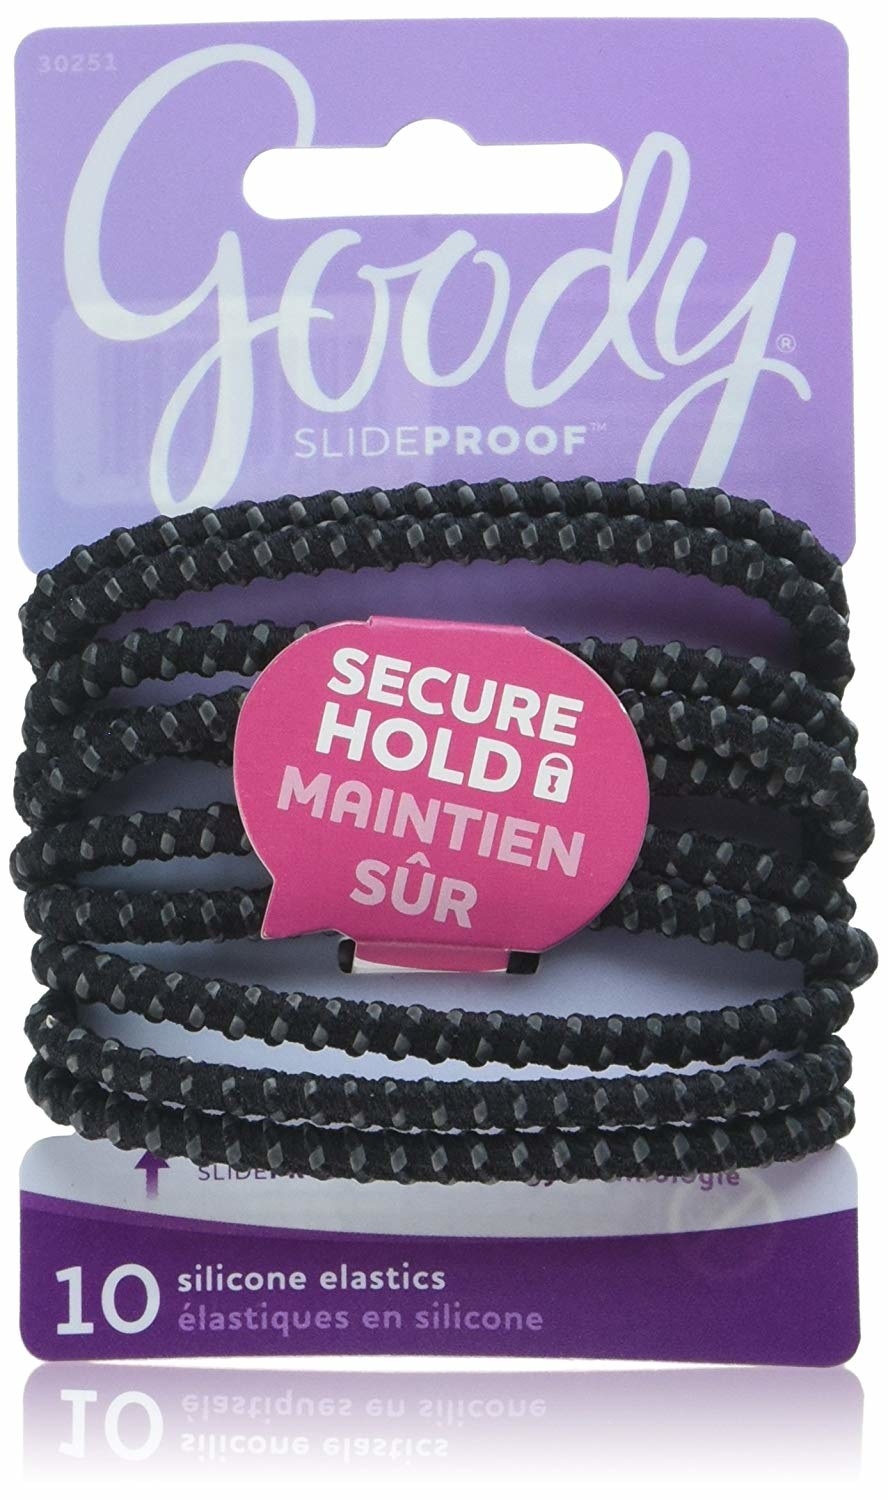 The hair ties with rubber